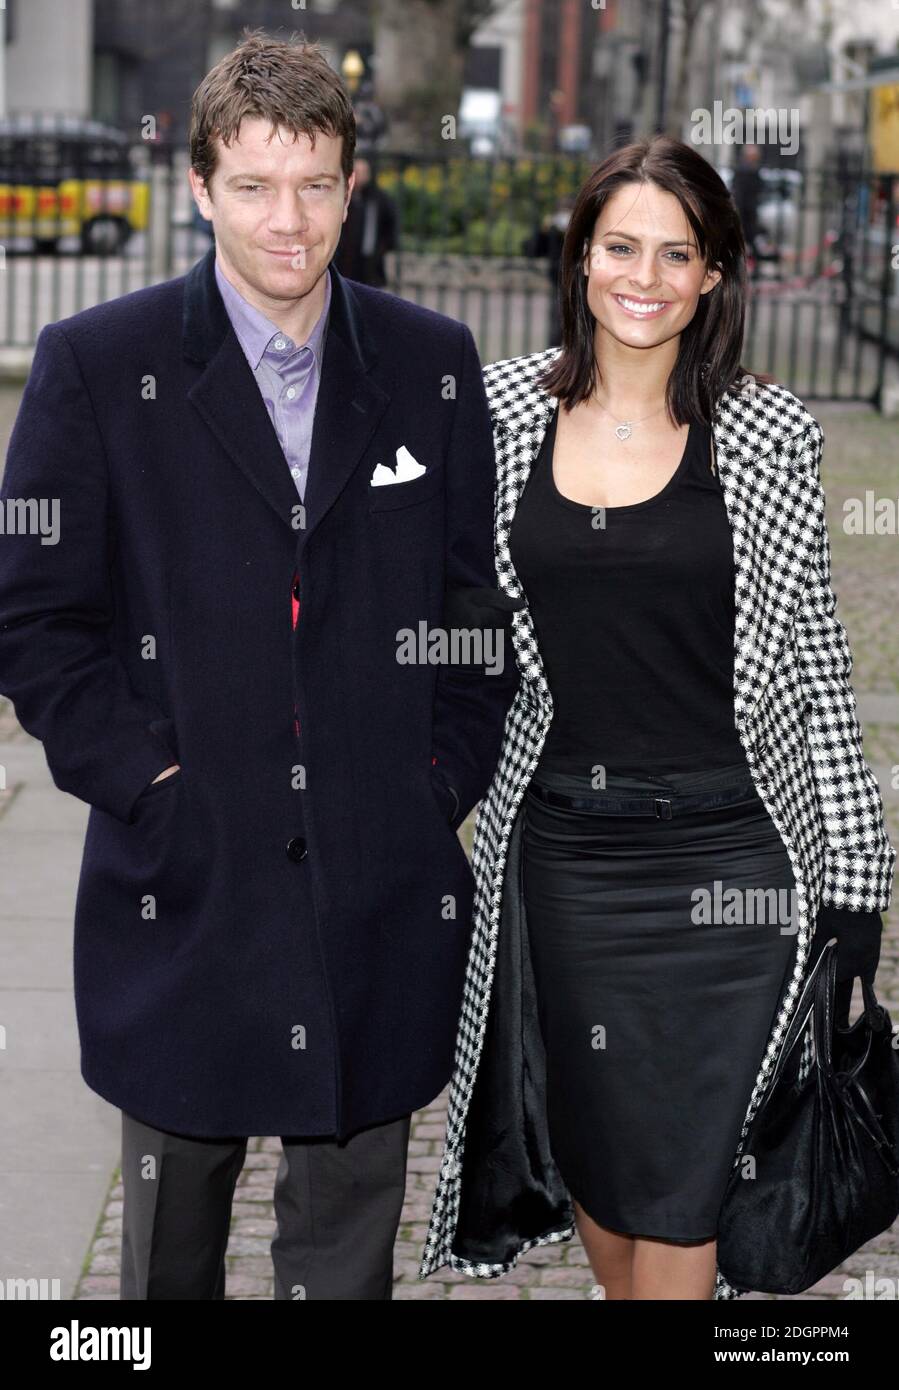 Max Beesley and Susie Amy arriving at the Woman's Own, Children of Courage 2004 event, Westminster Abbey, London. Doug Peters/allactiondigital.com  Stock Photo